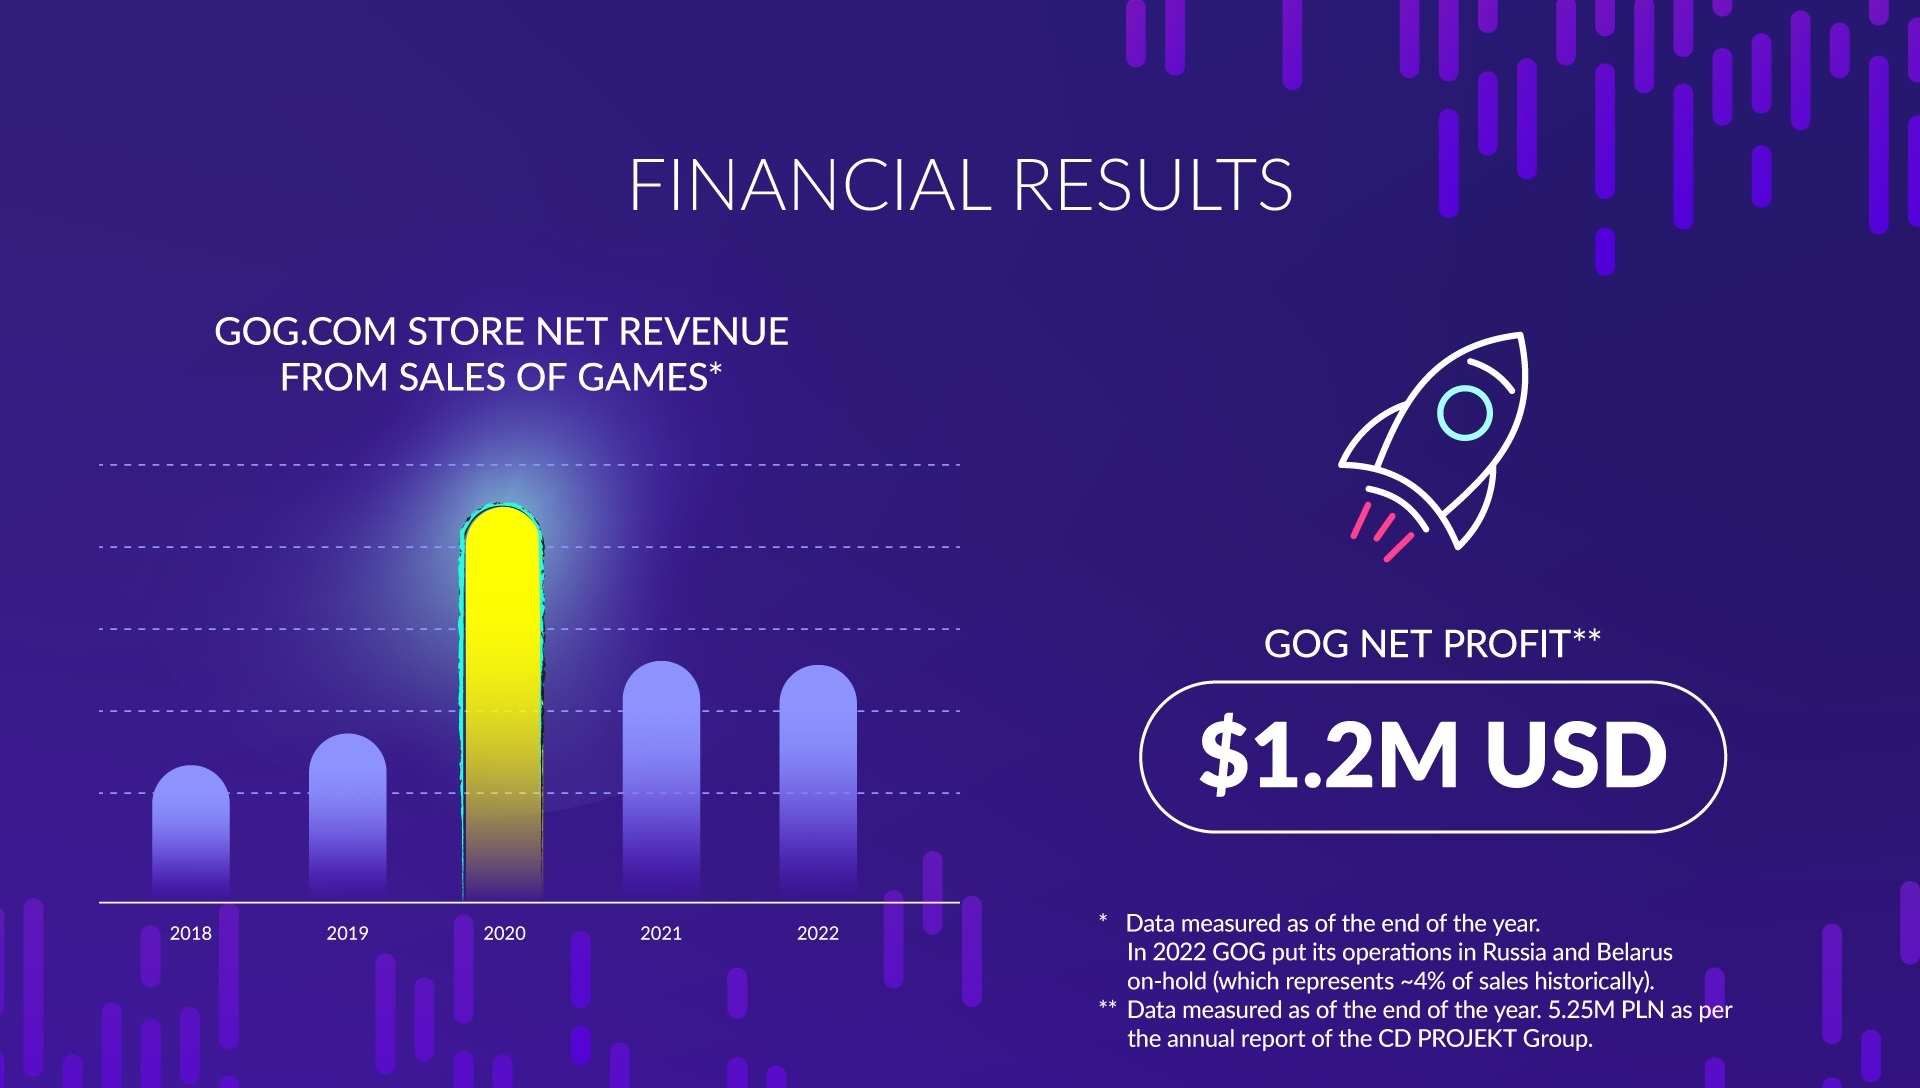 GOG financial results showing lopsided record revenue in 2020, stable revenue in 21 and 22, and $1.2 million in profit for 22.